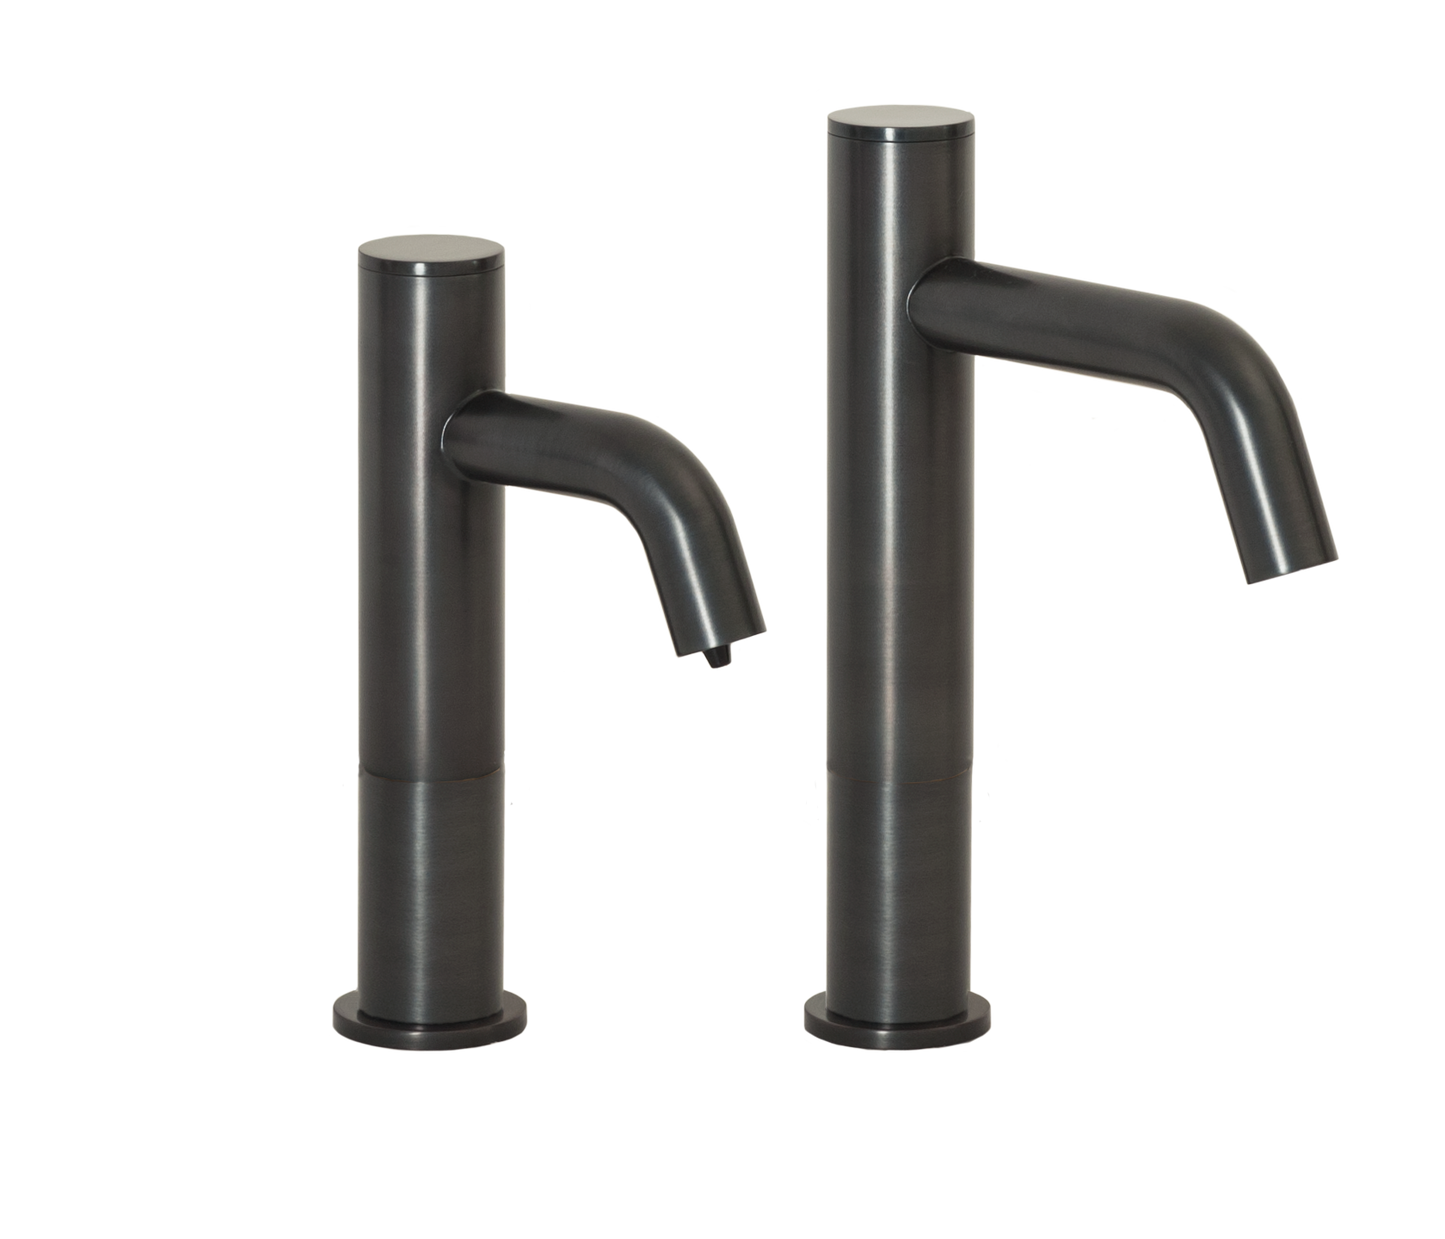 MP3263 Automatic Hands-Free Faucet with 6” Spout Reach, 3” Riser and Automatic Soap Dispenser with 32oz. Bottle In Oil Rubbed Bronze